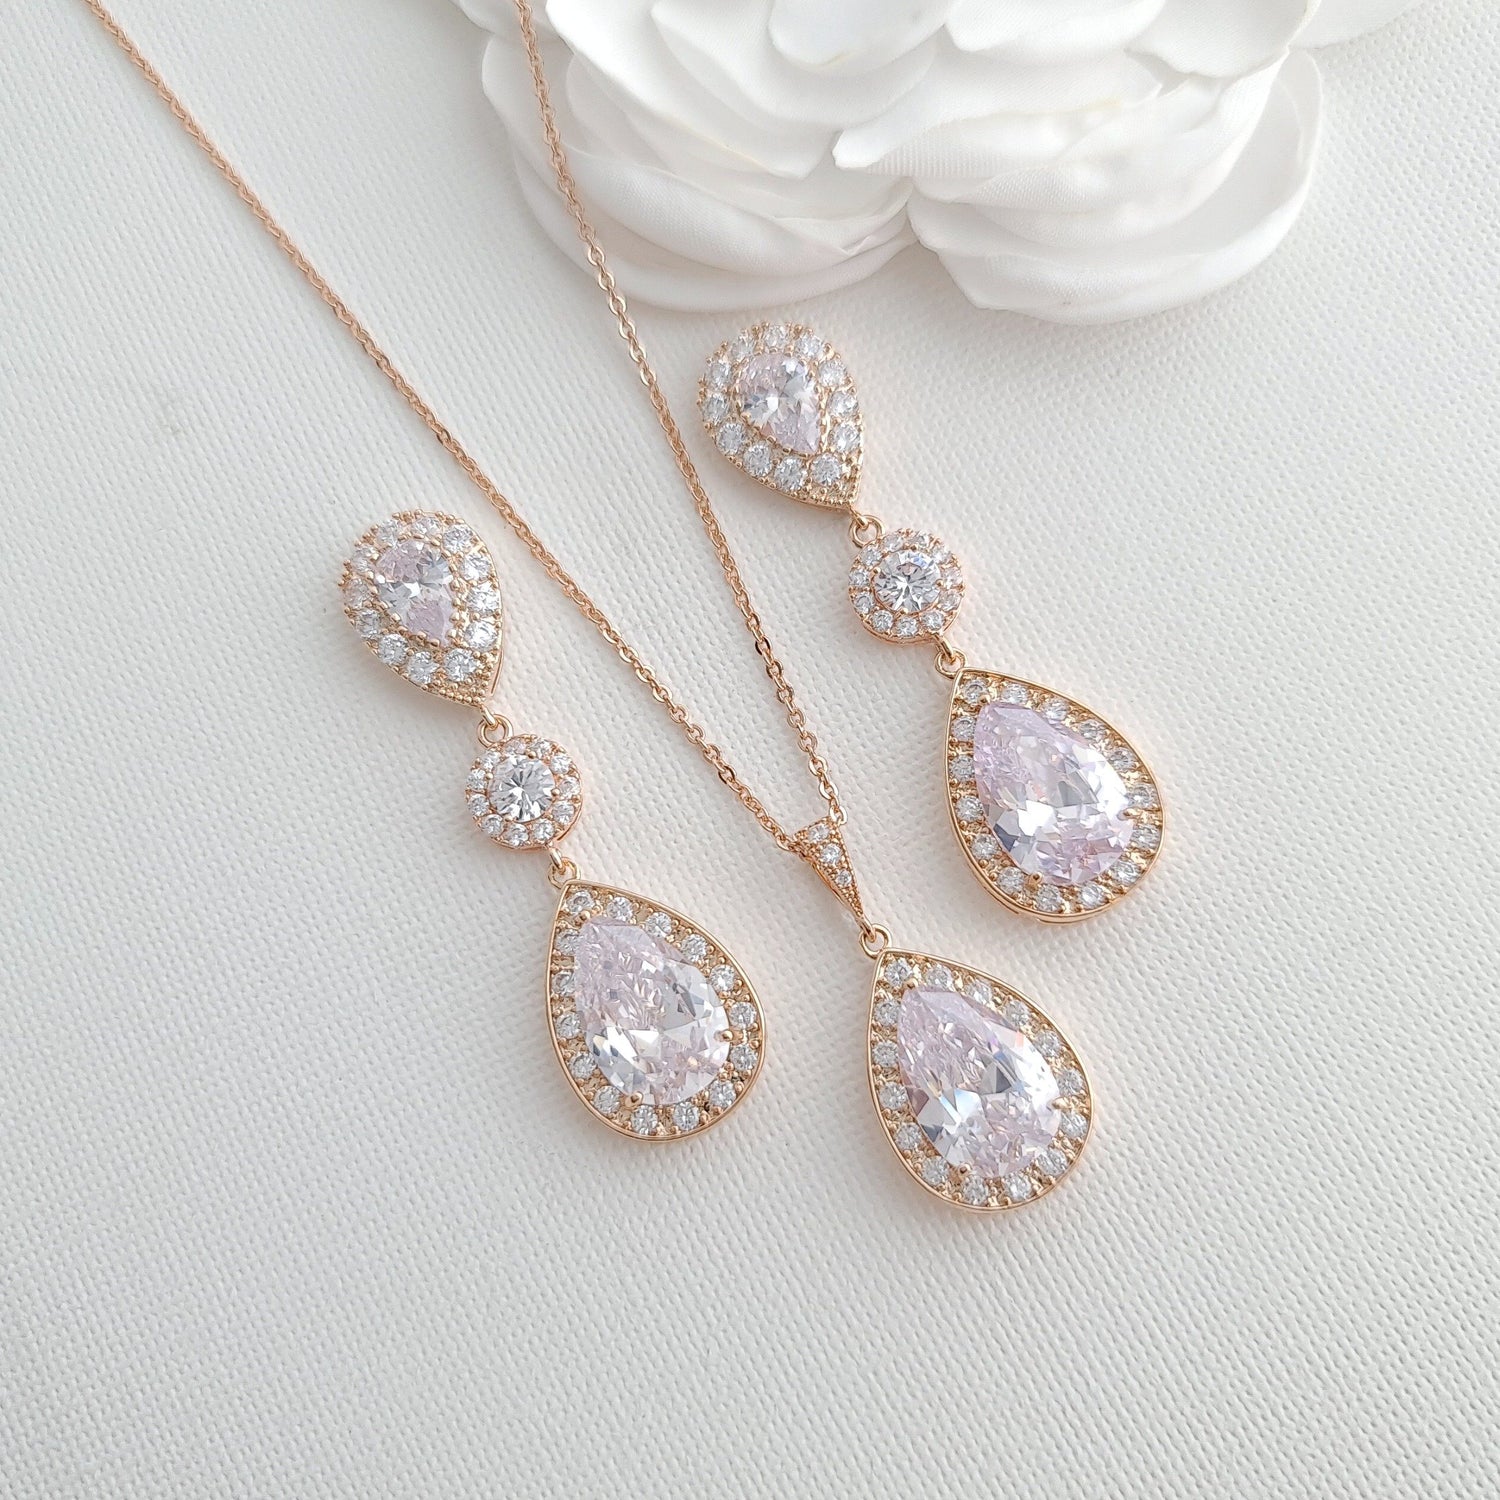 Gold Wedding Jewelry Sets for Brides With Earrings Necklace Together- Penelope - PoetryDesigns